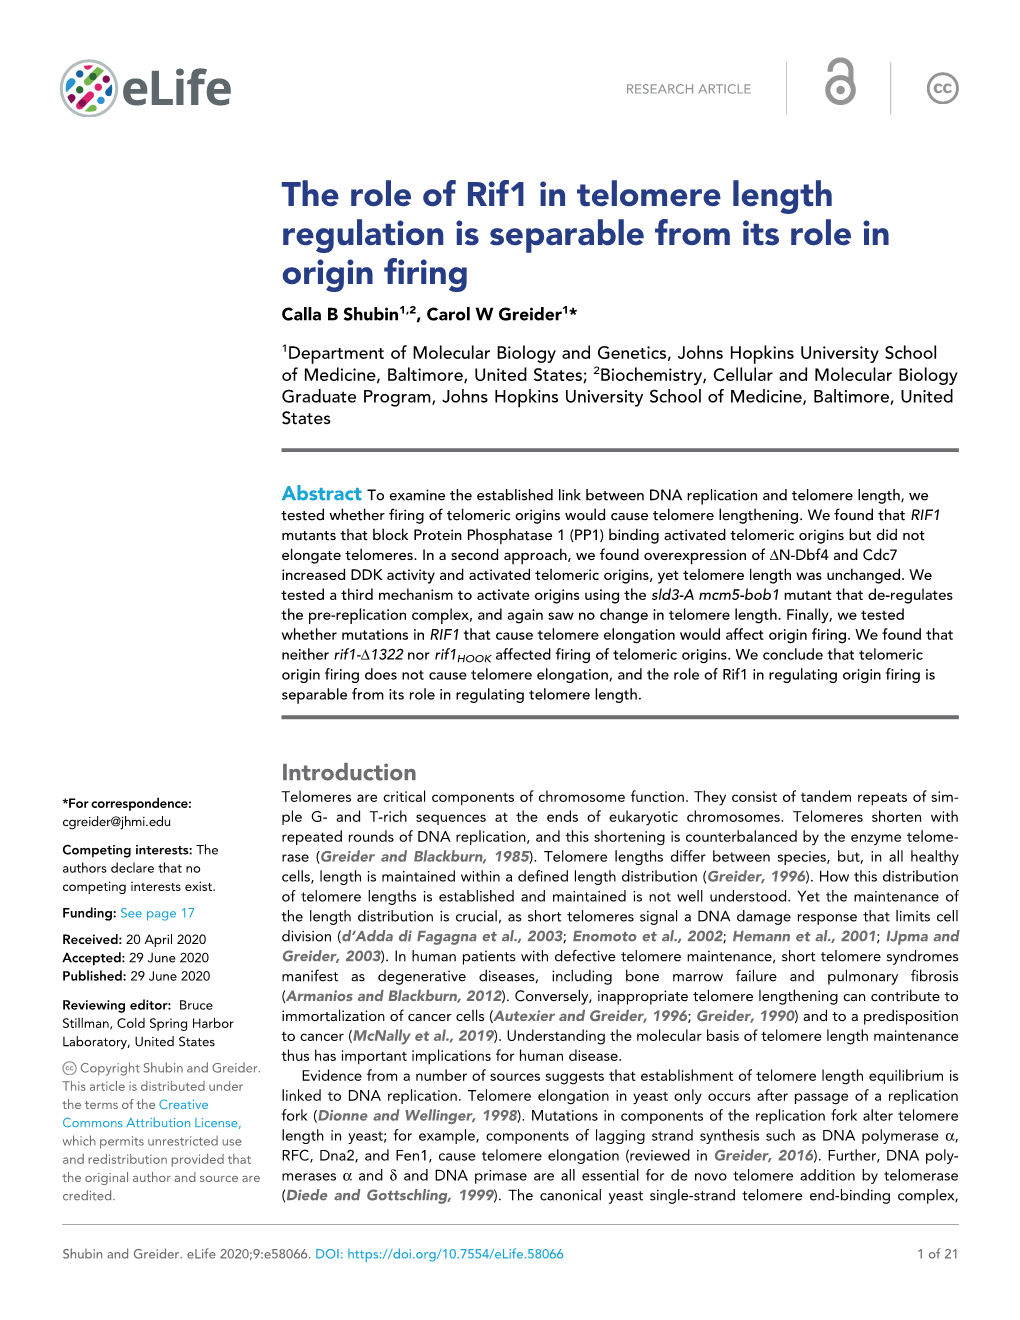 The Role of Rif1 in Telomere Length Regulation Is Separable from Its Role in Origin Firing Calla B Shubin1,2, Carol W Greider1*